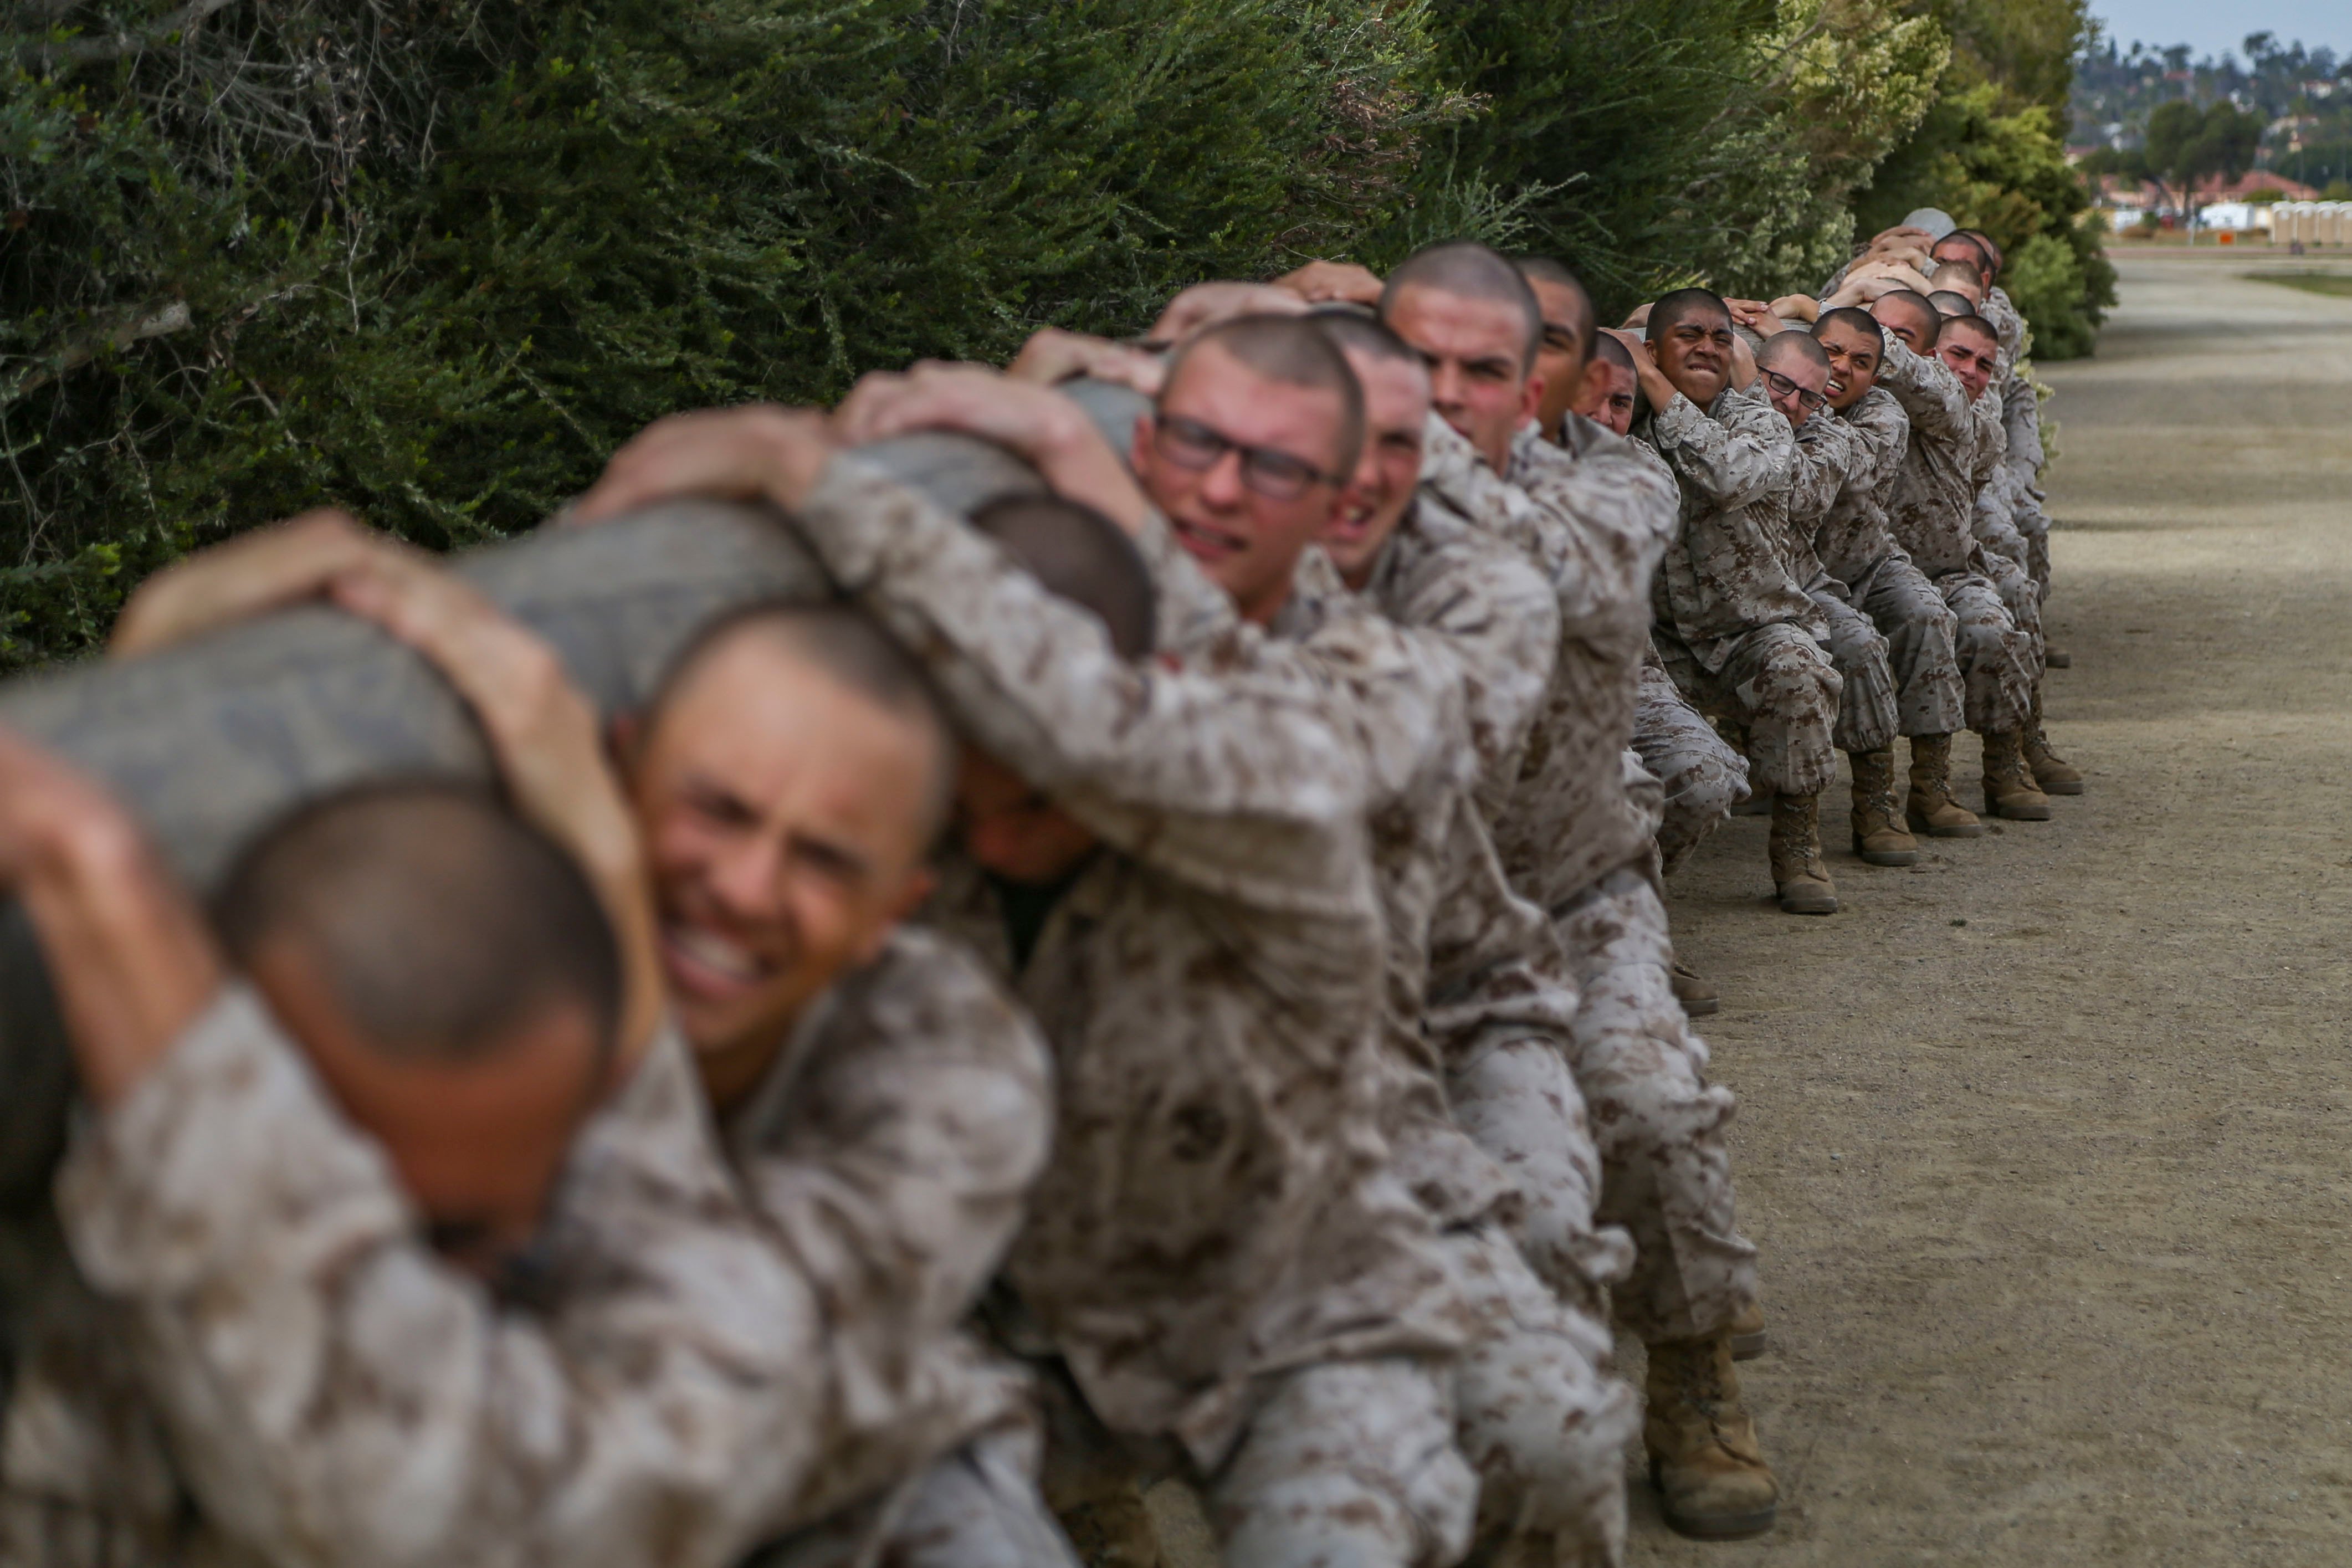 Tough Military Recruiting Environment is About More than Low